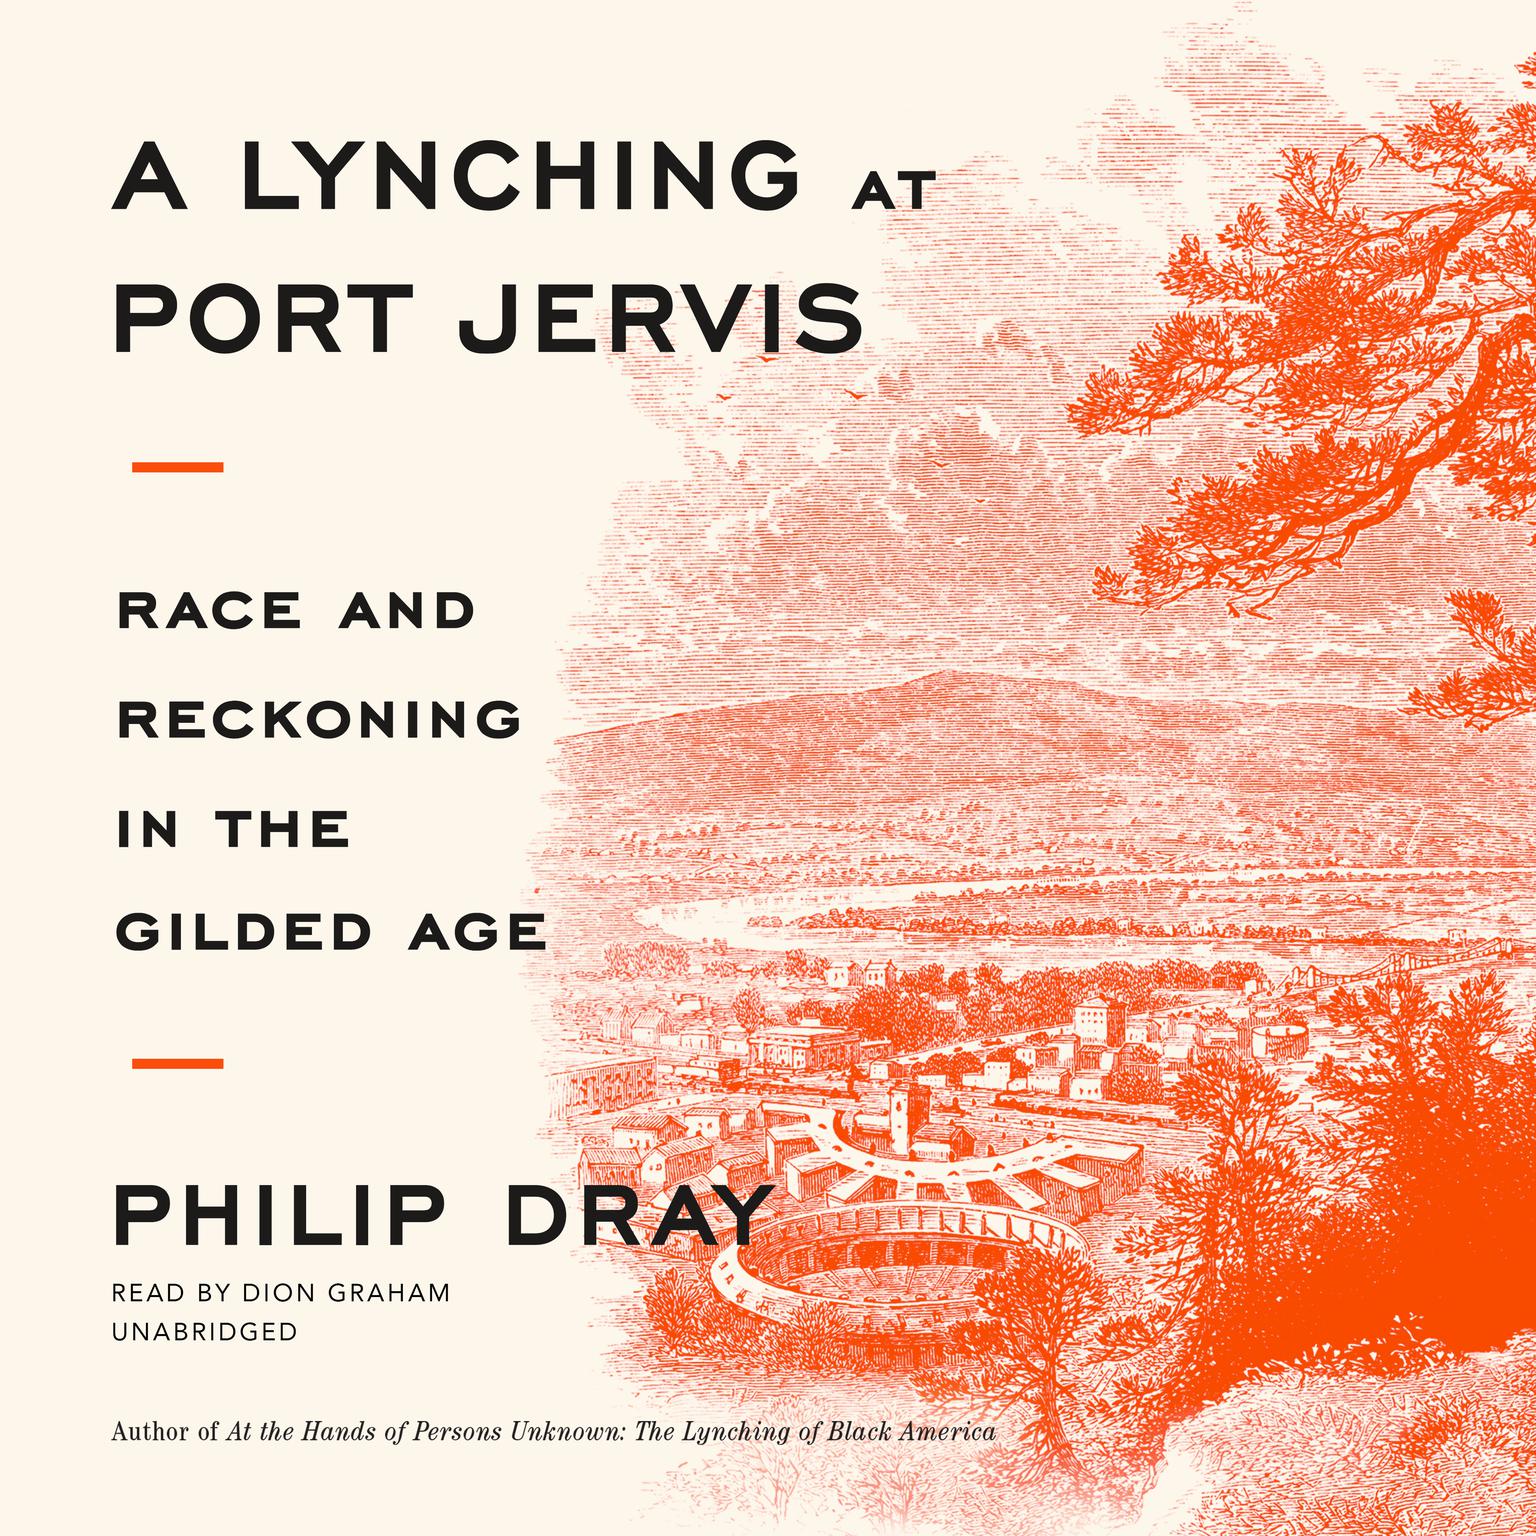 A Lynching at Port Jervis: Race and Reckoning in the Gilded Age  Audiobook, by Philip Dray